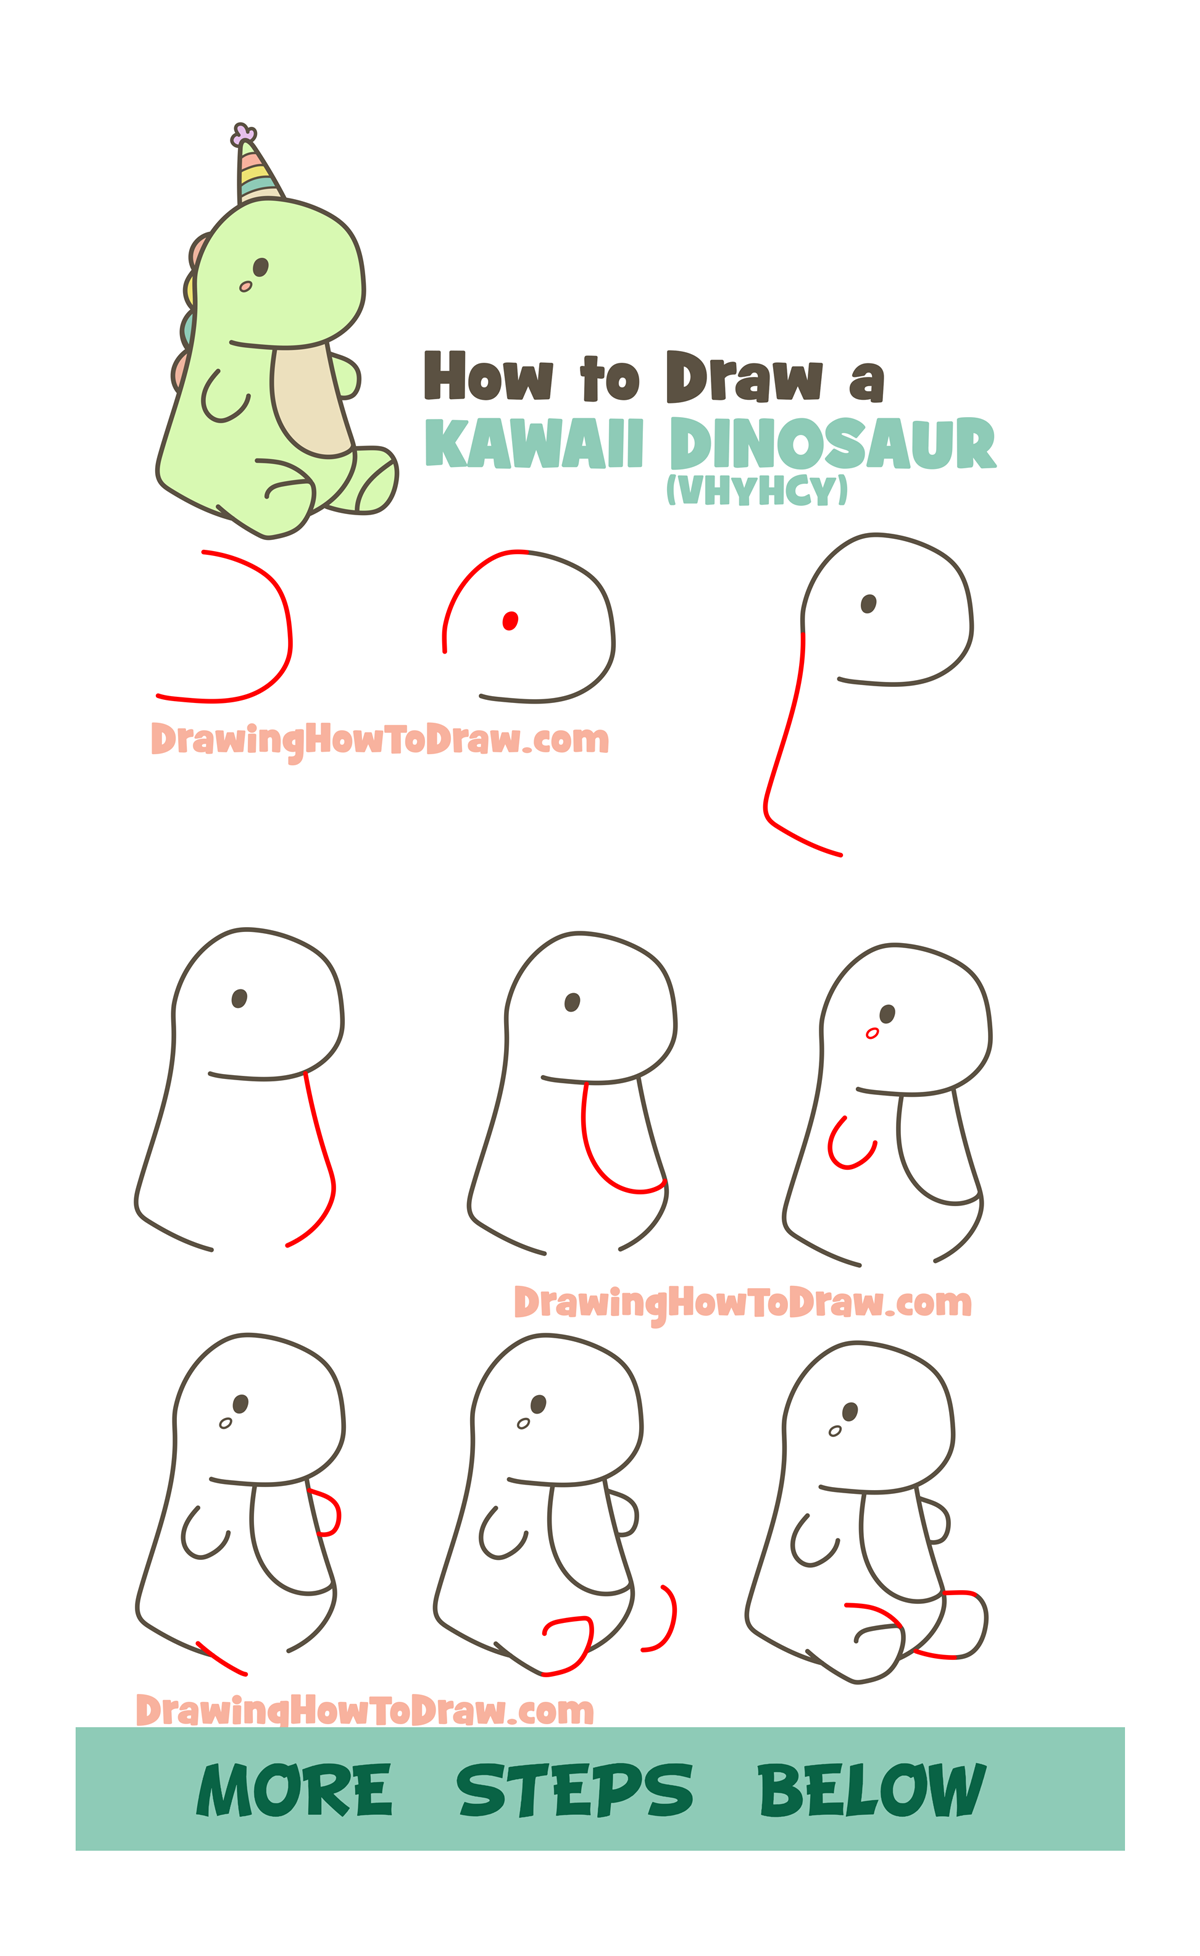 How to Draw a Cute Kawaii Dinosaur with a Birthday Hat on (VHYHCY Stuffed Animal Drawing) Easy Step by Step Drawing Tutorial